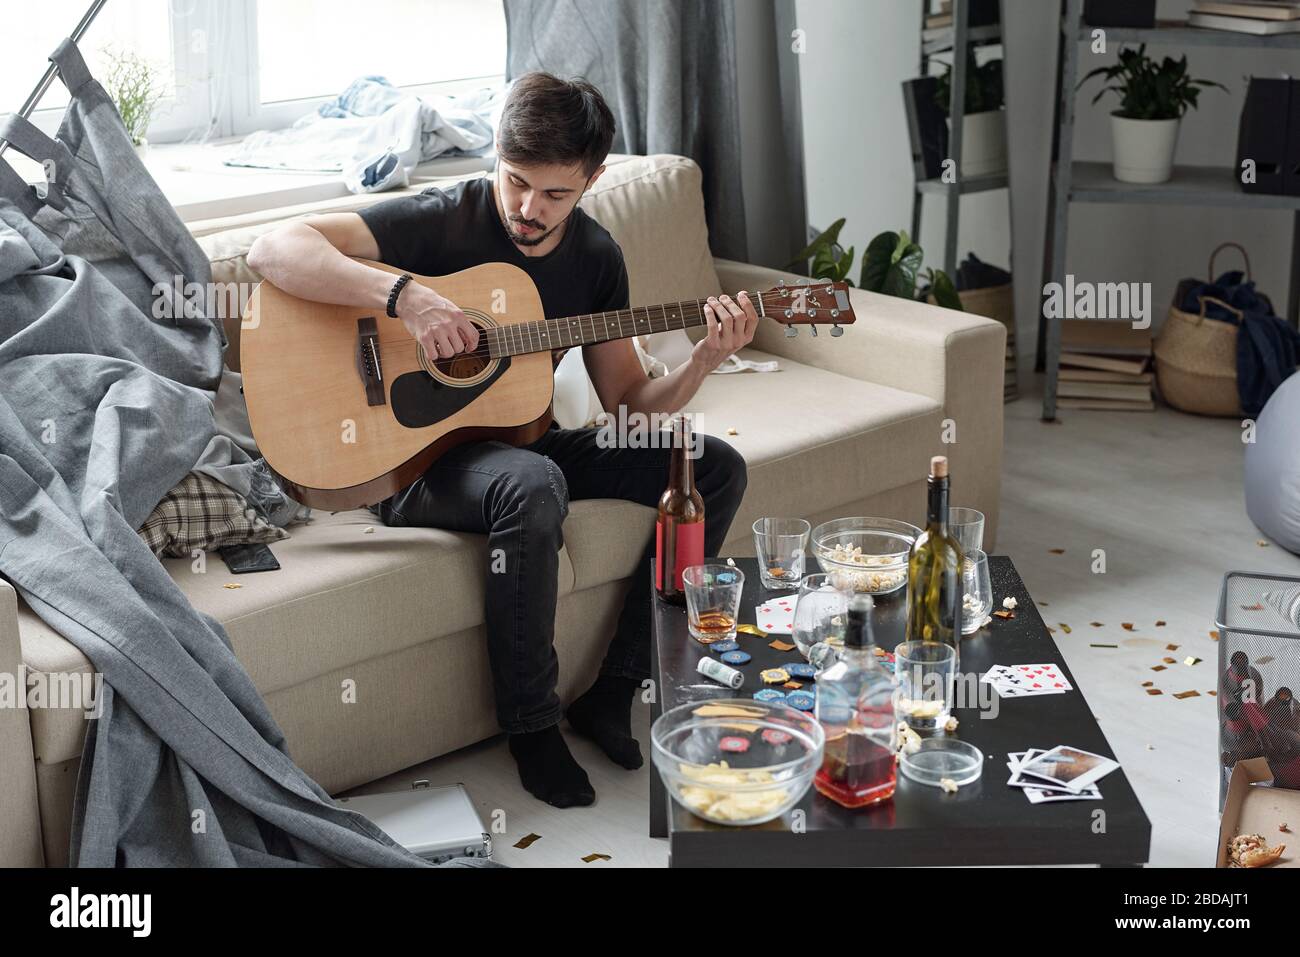 Young man sitting on sofa with curtain and playing guitar in messy flat after party, table with alcohol and playing pieces Stock Photo